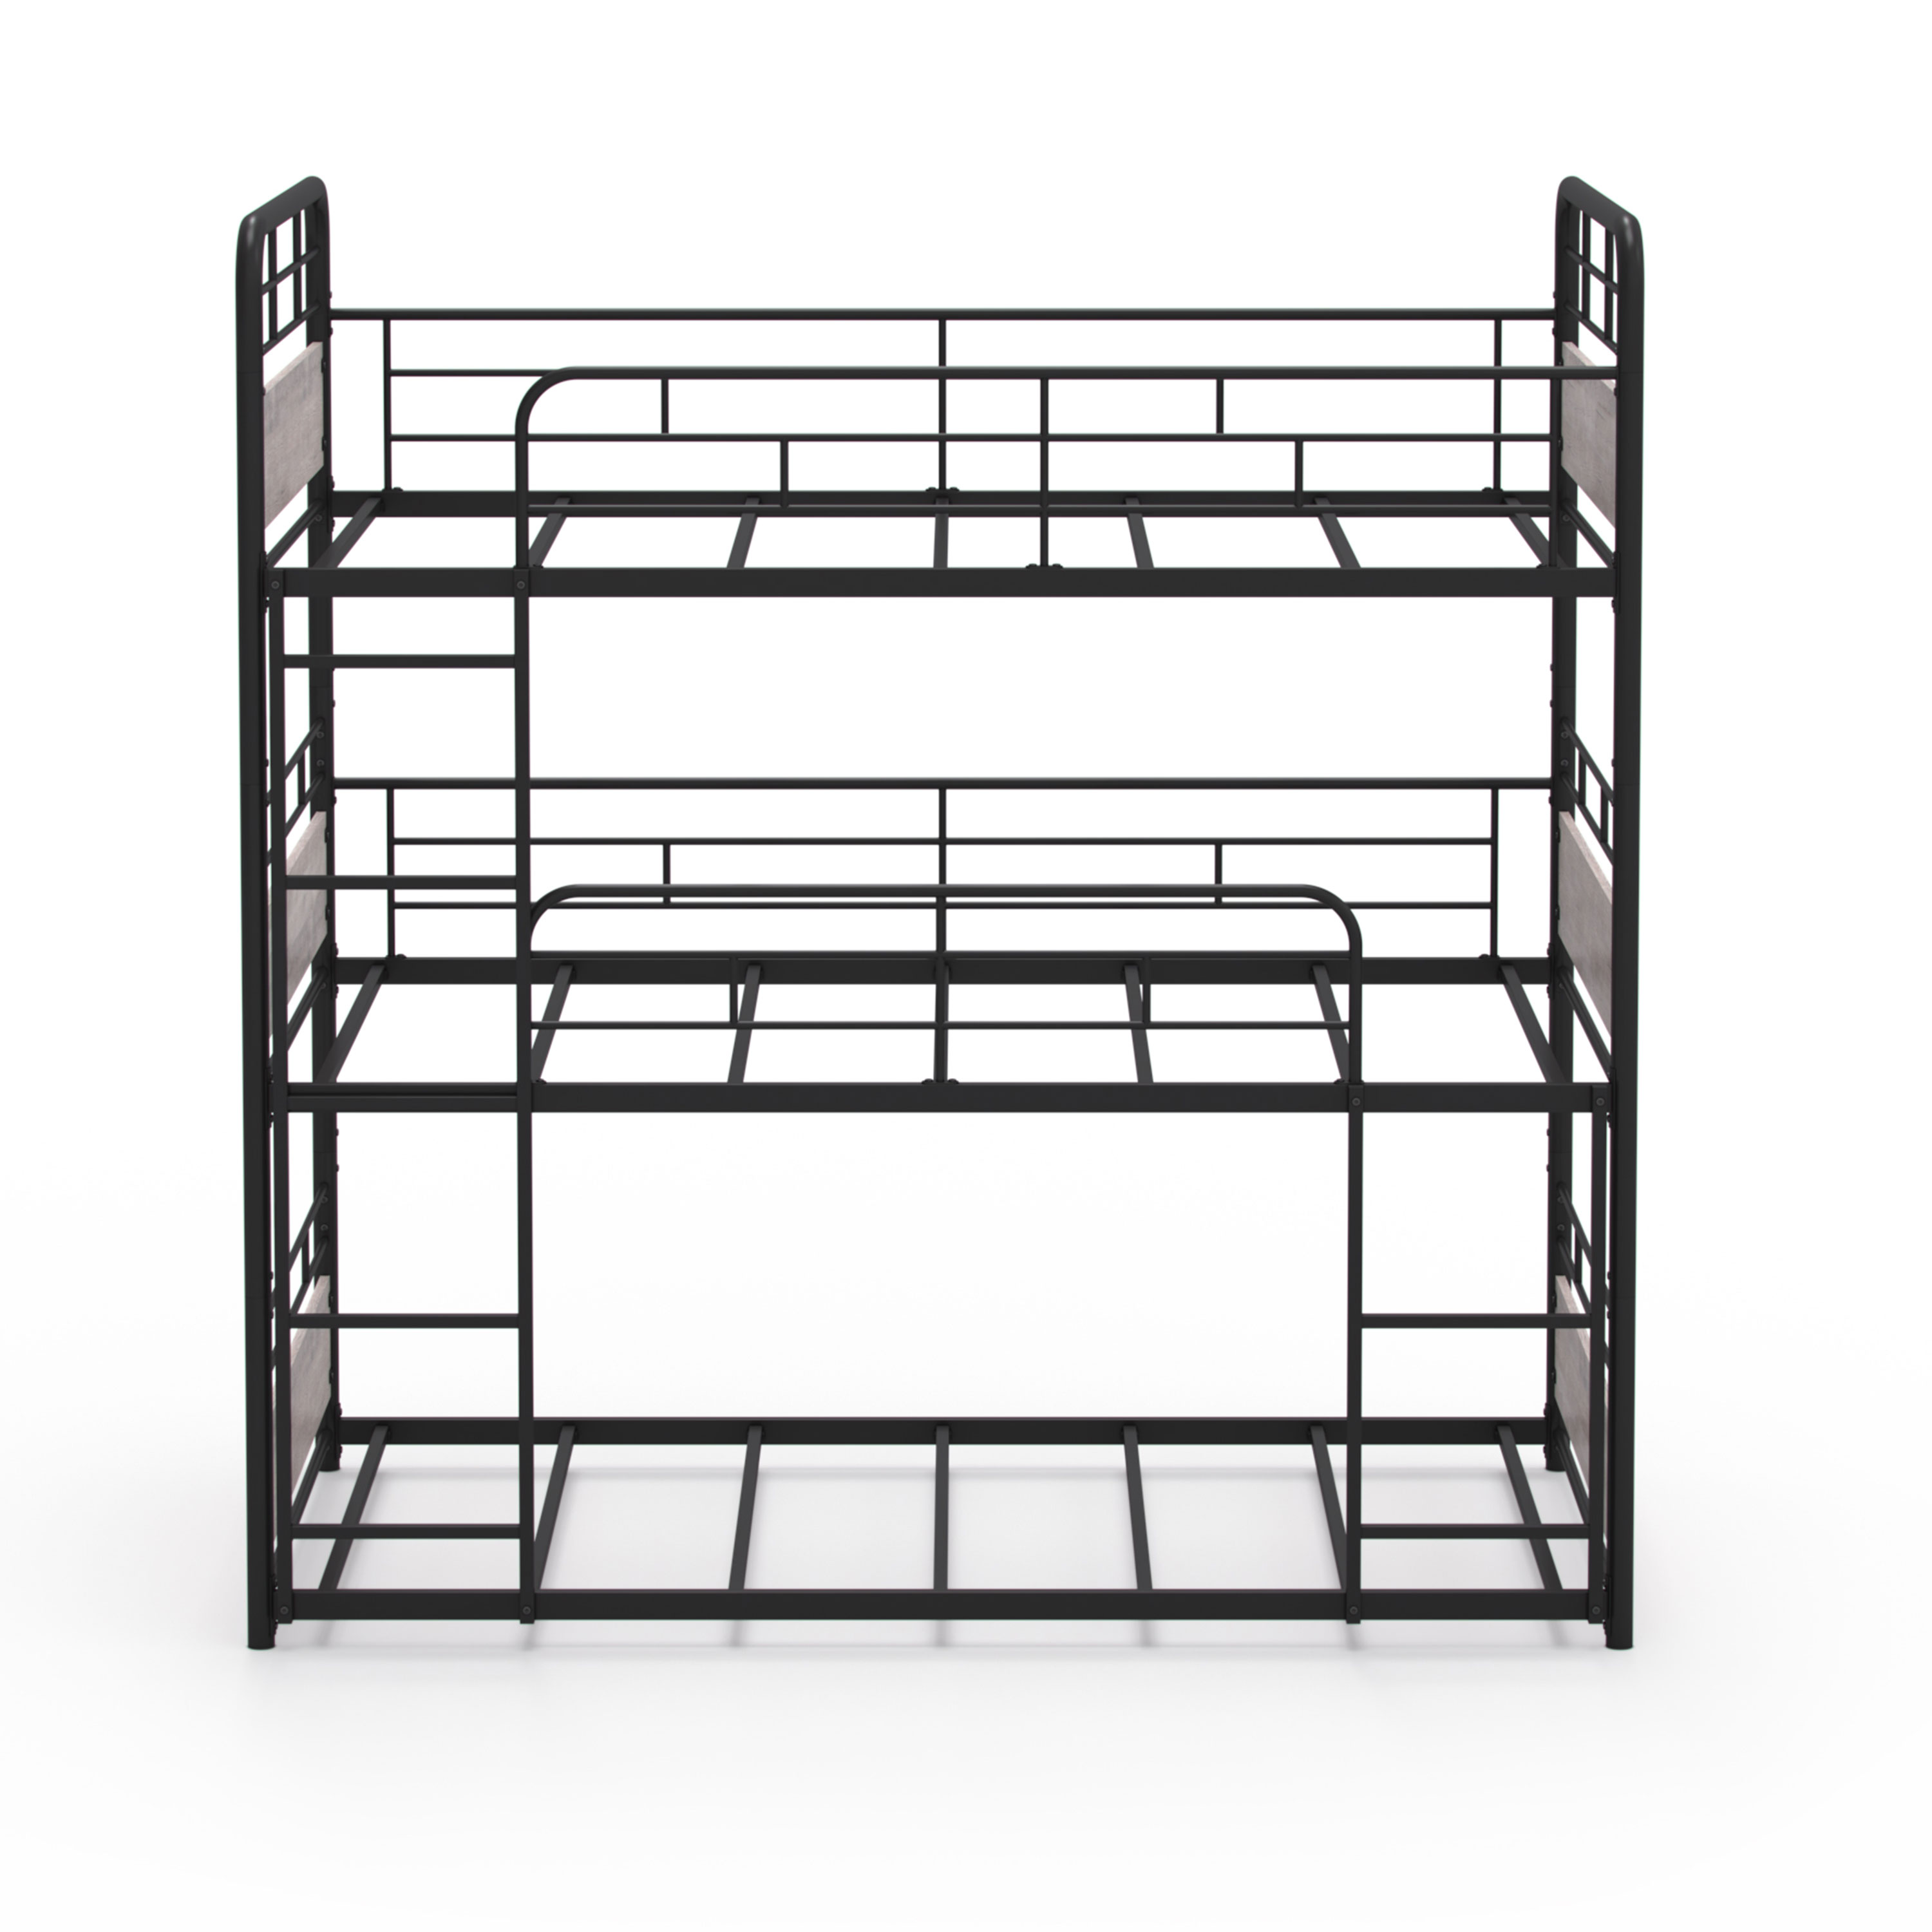 Better Homes & Gardens Anniston Convertible Black Metal Triple Twin Bunk Bed, Gray Wood Accents - image 12 of 26